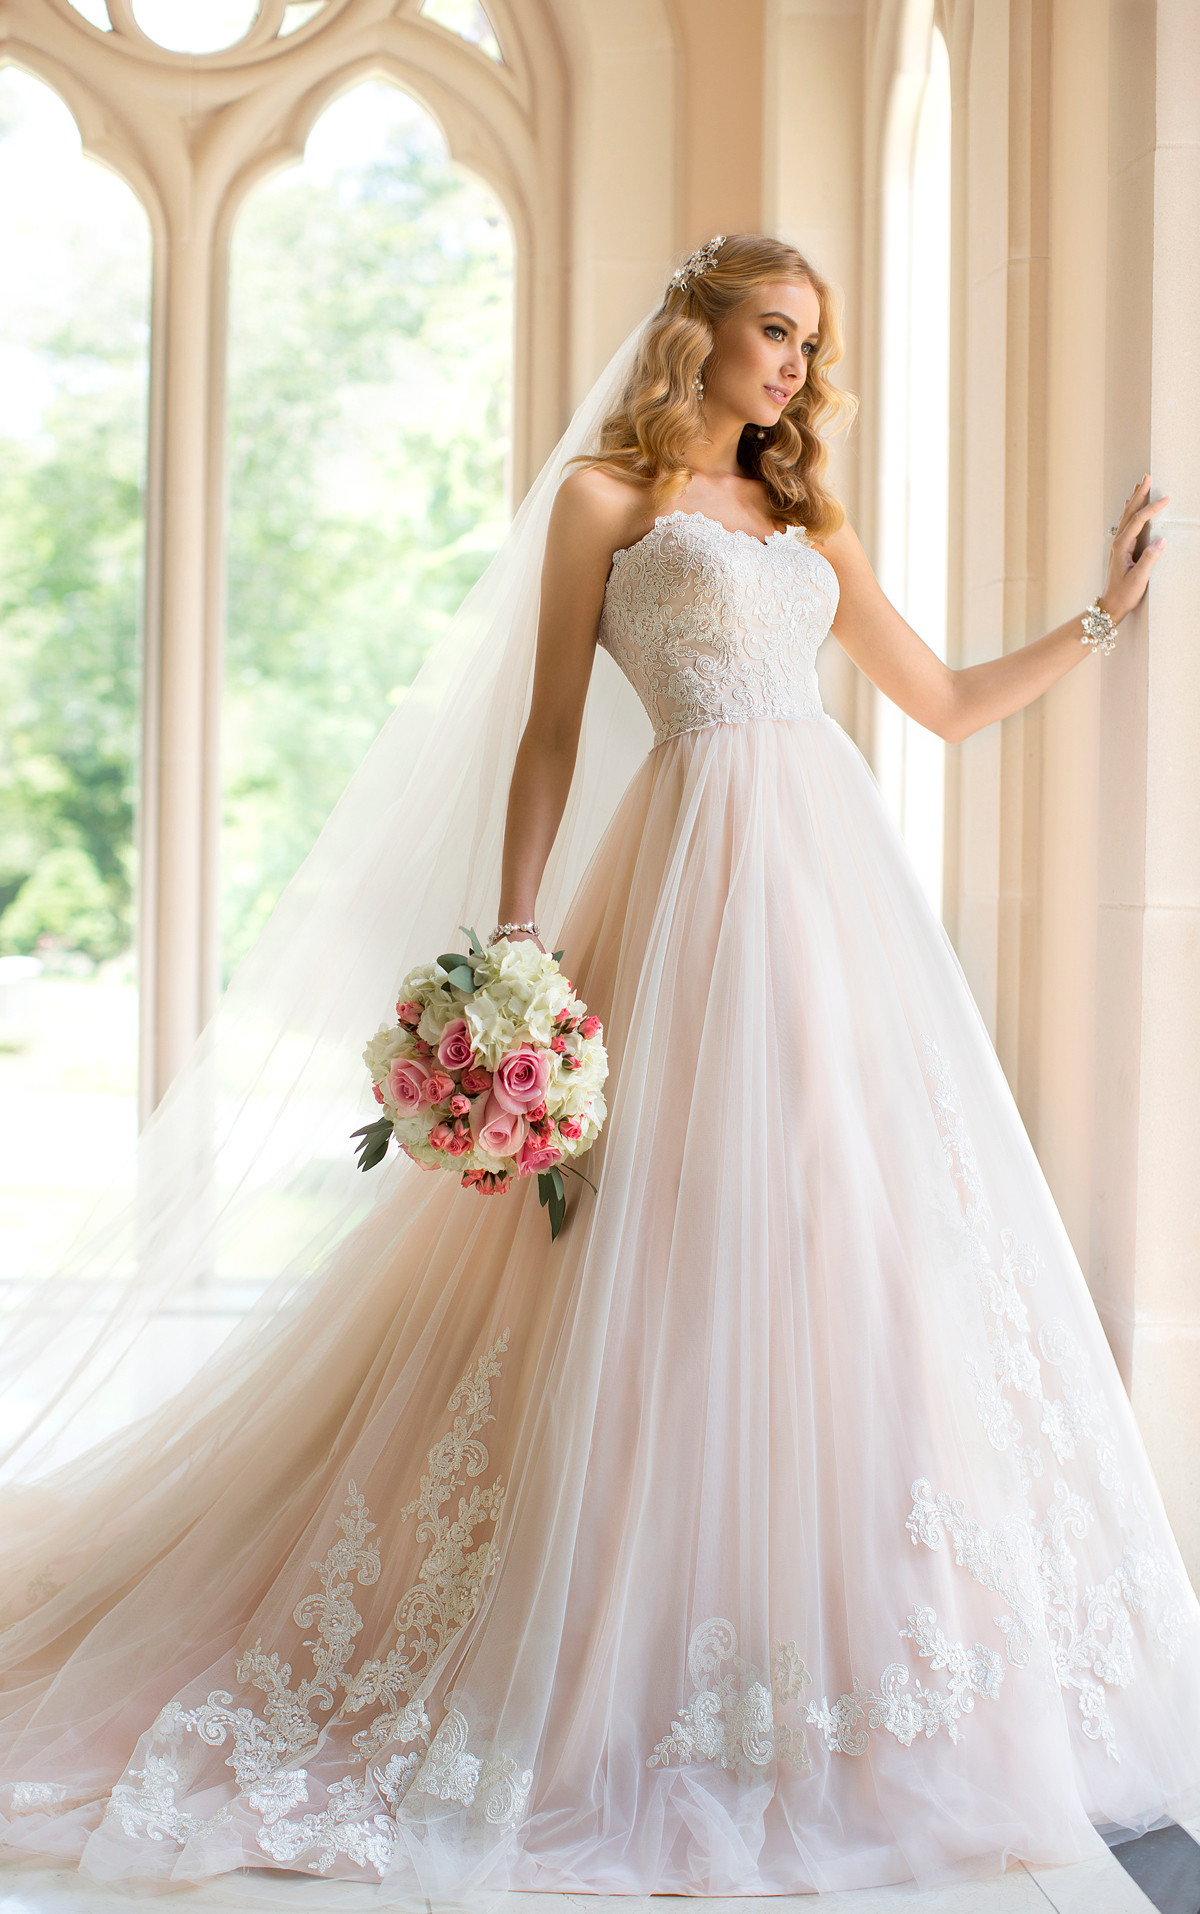 Wedding Gown Designers List
 The Best Gowns from The Most In Demand Wedding Dress